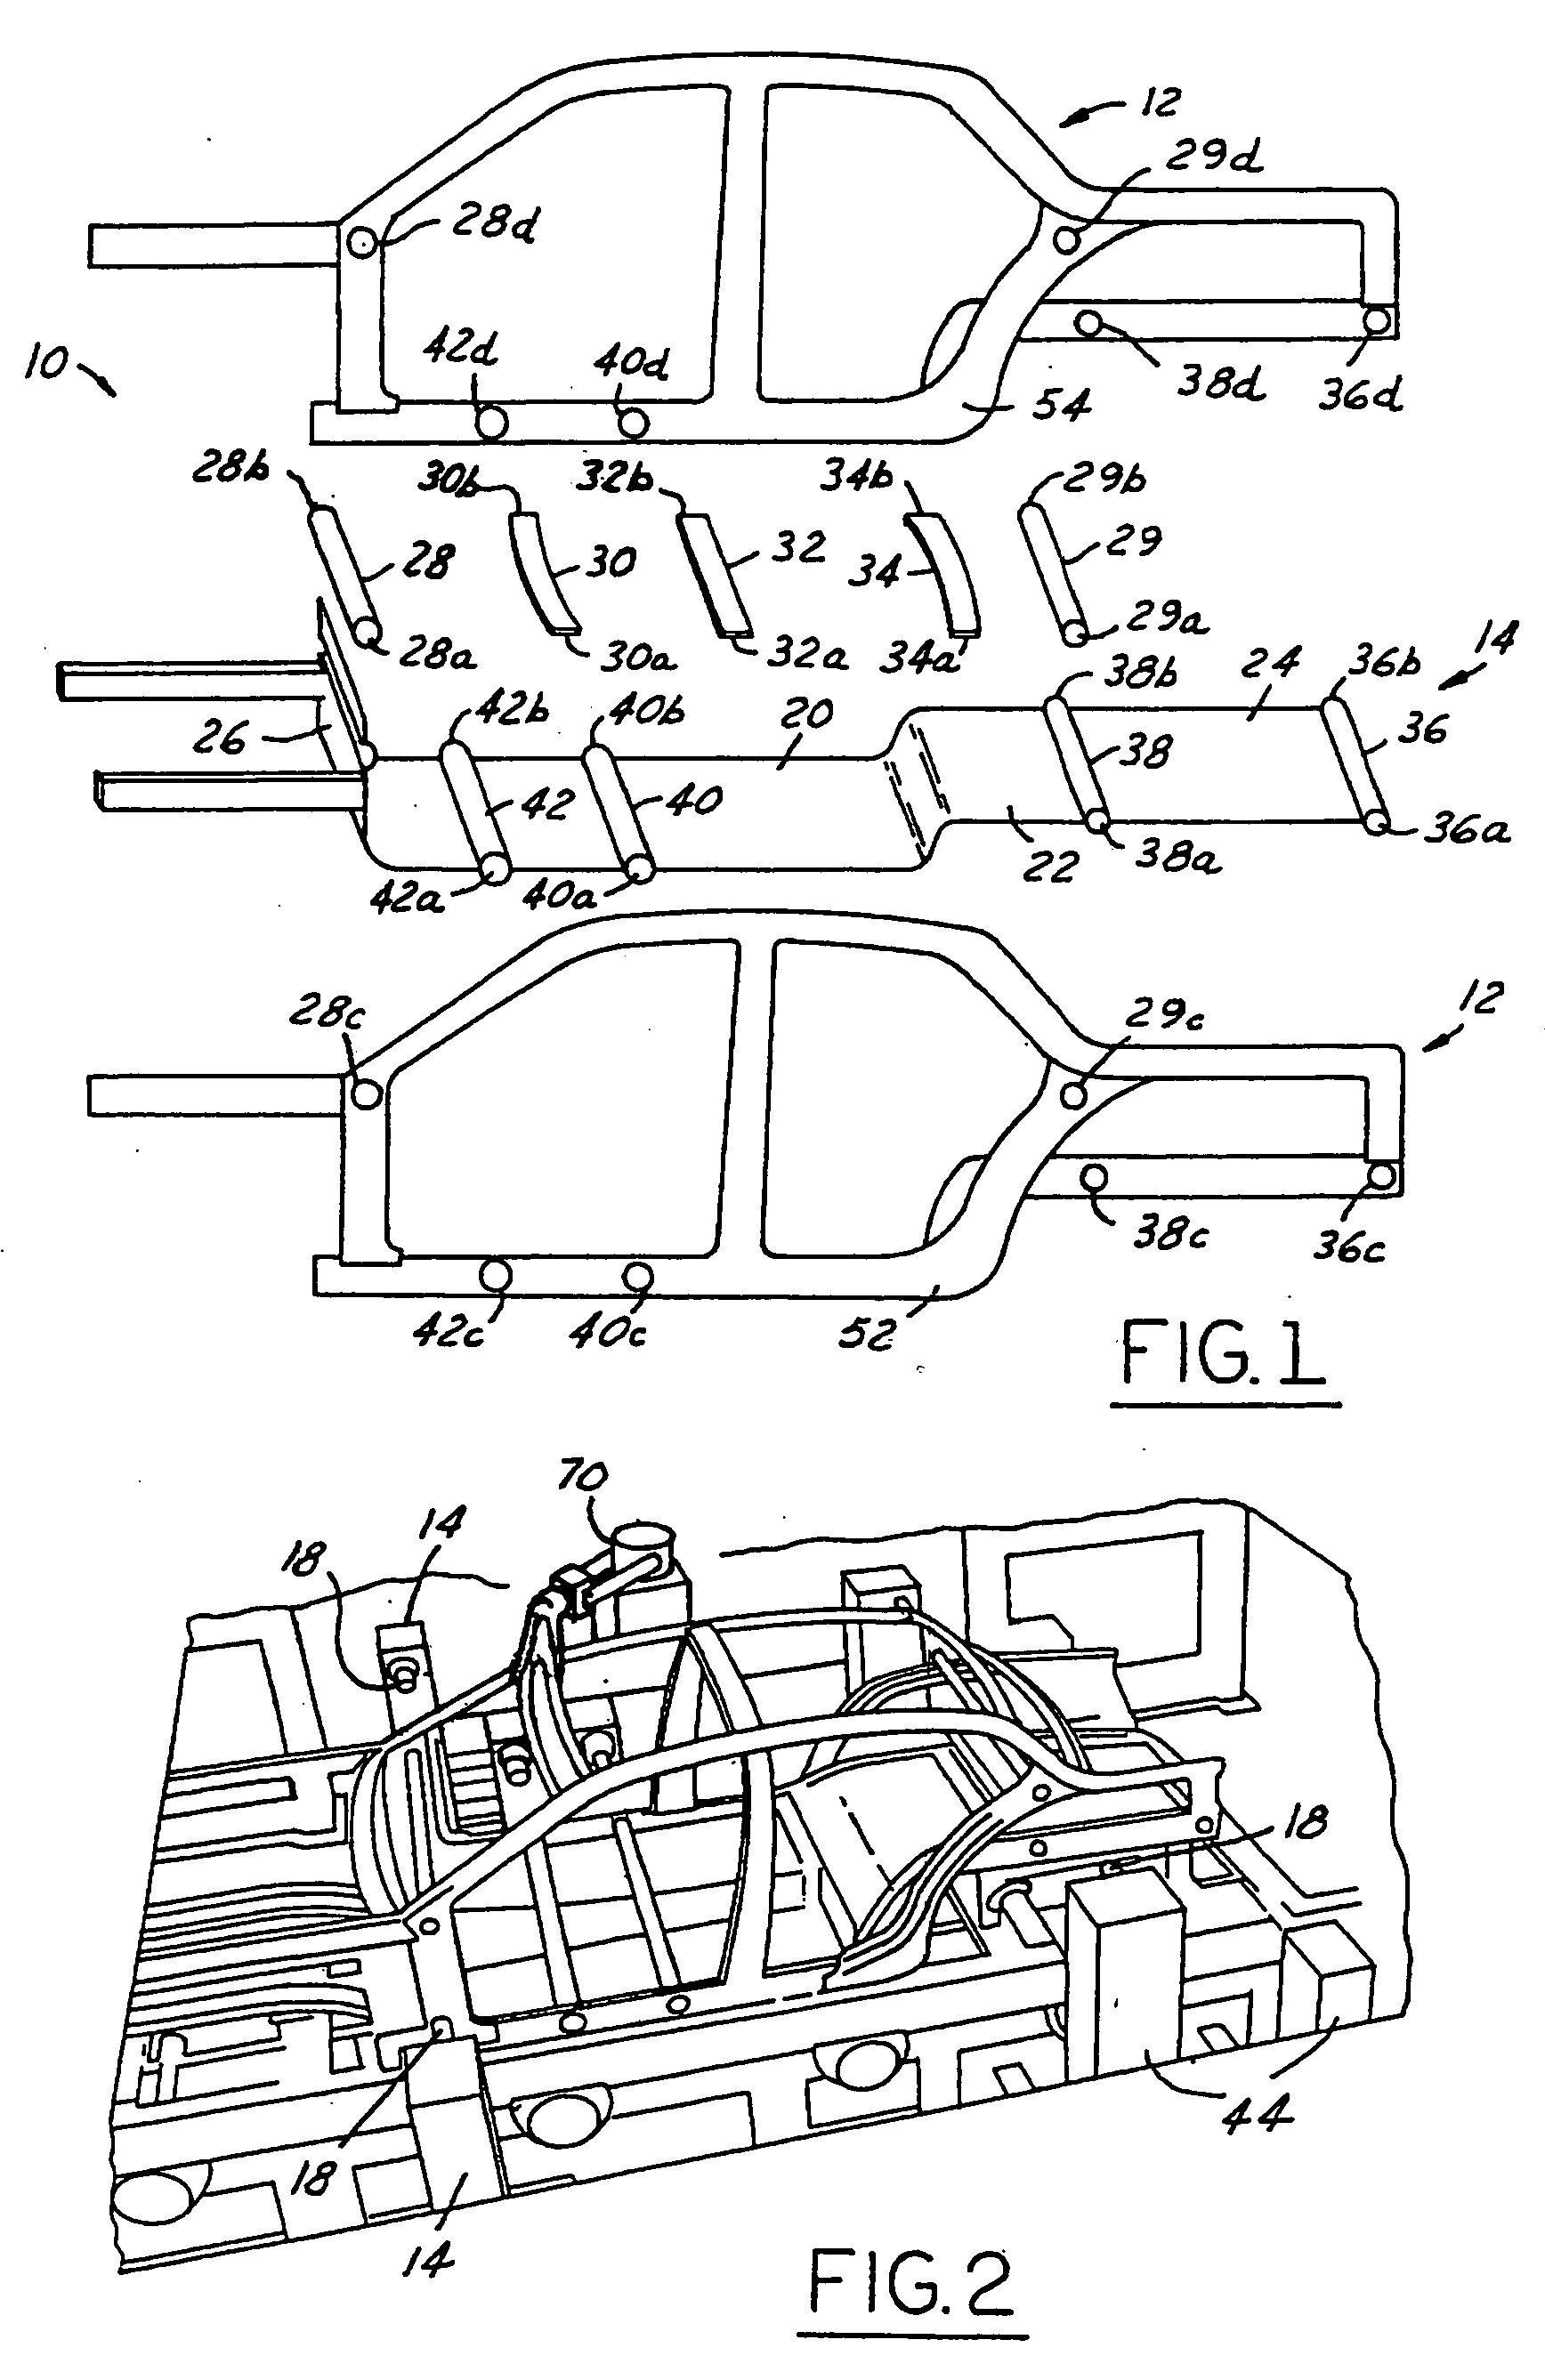 Magnetically pulse welded underbody